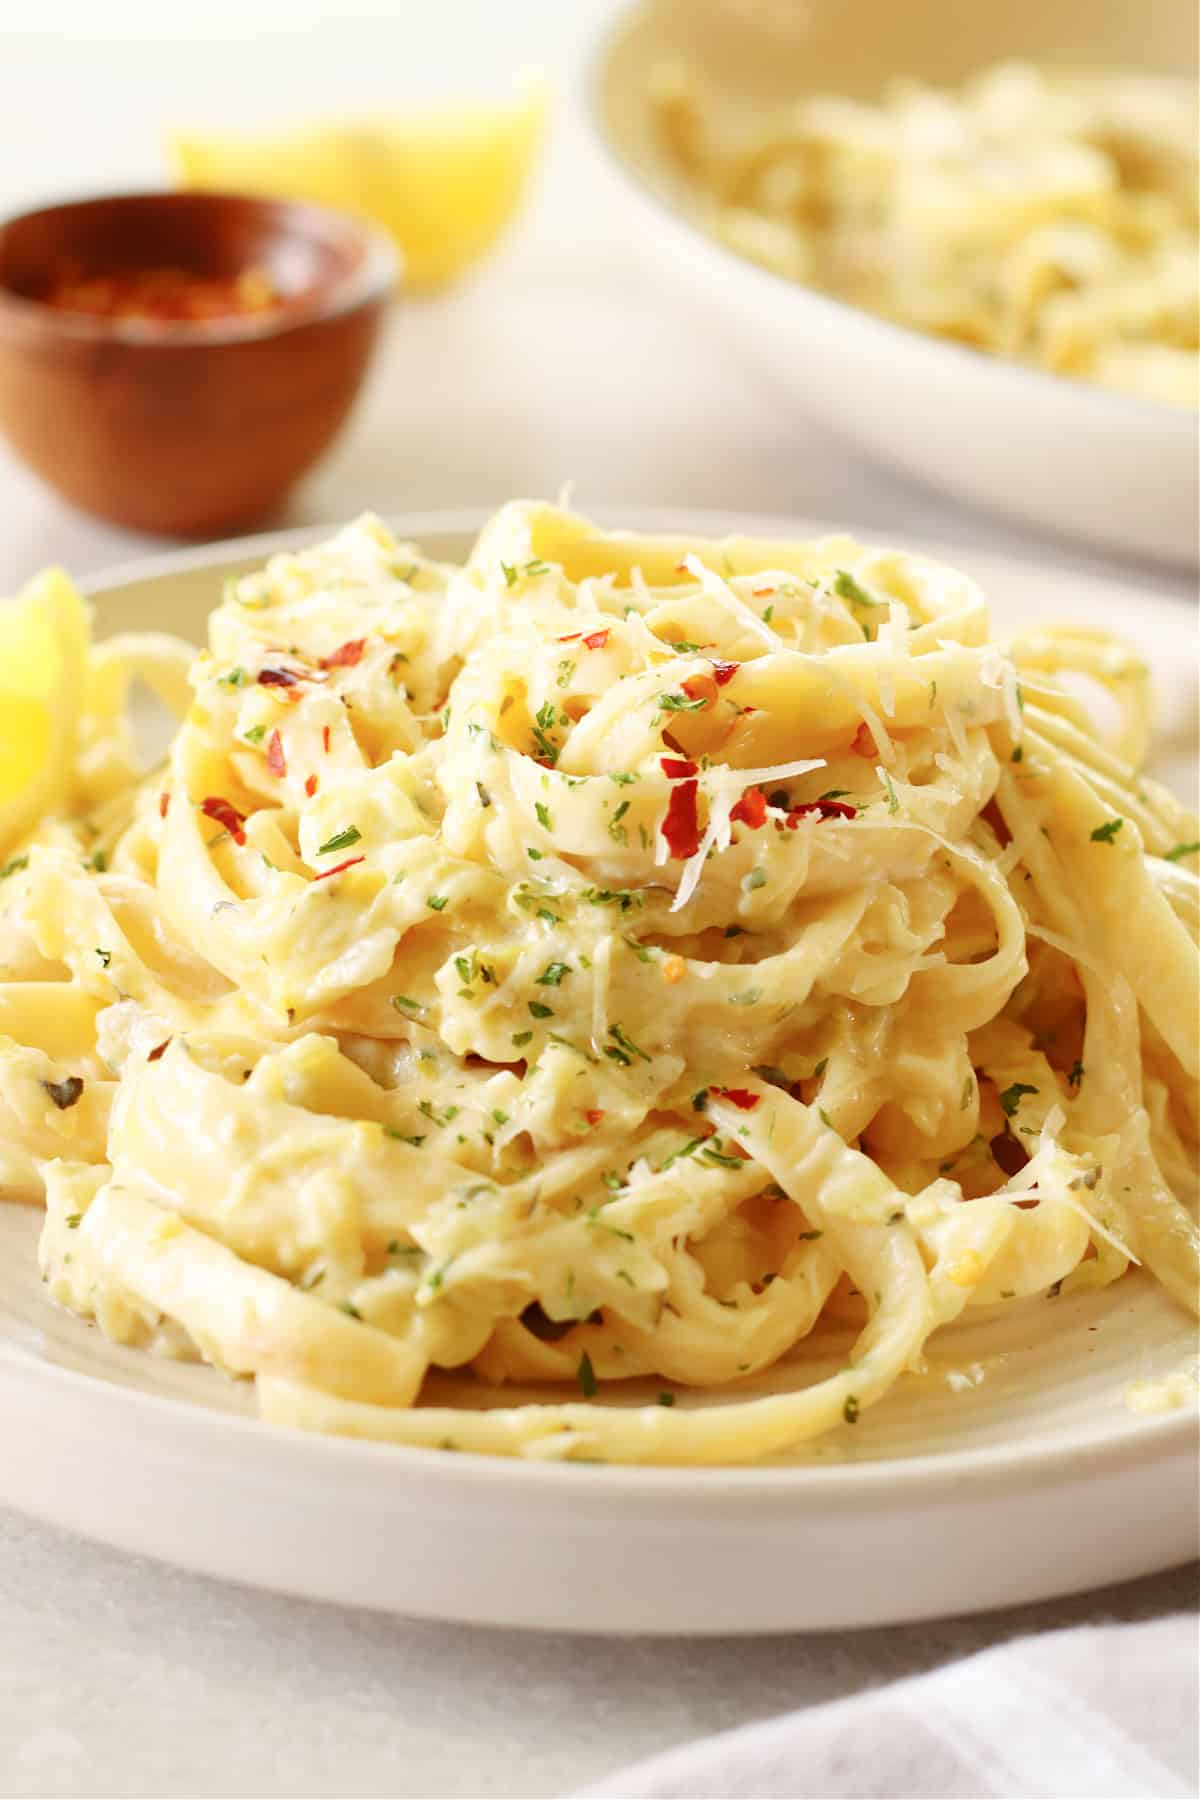 A serving of fettuccine with zucchini sauce on a cream plate.